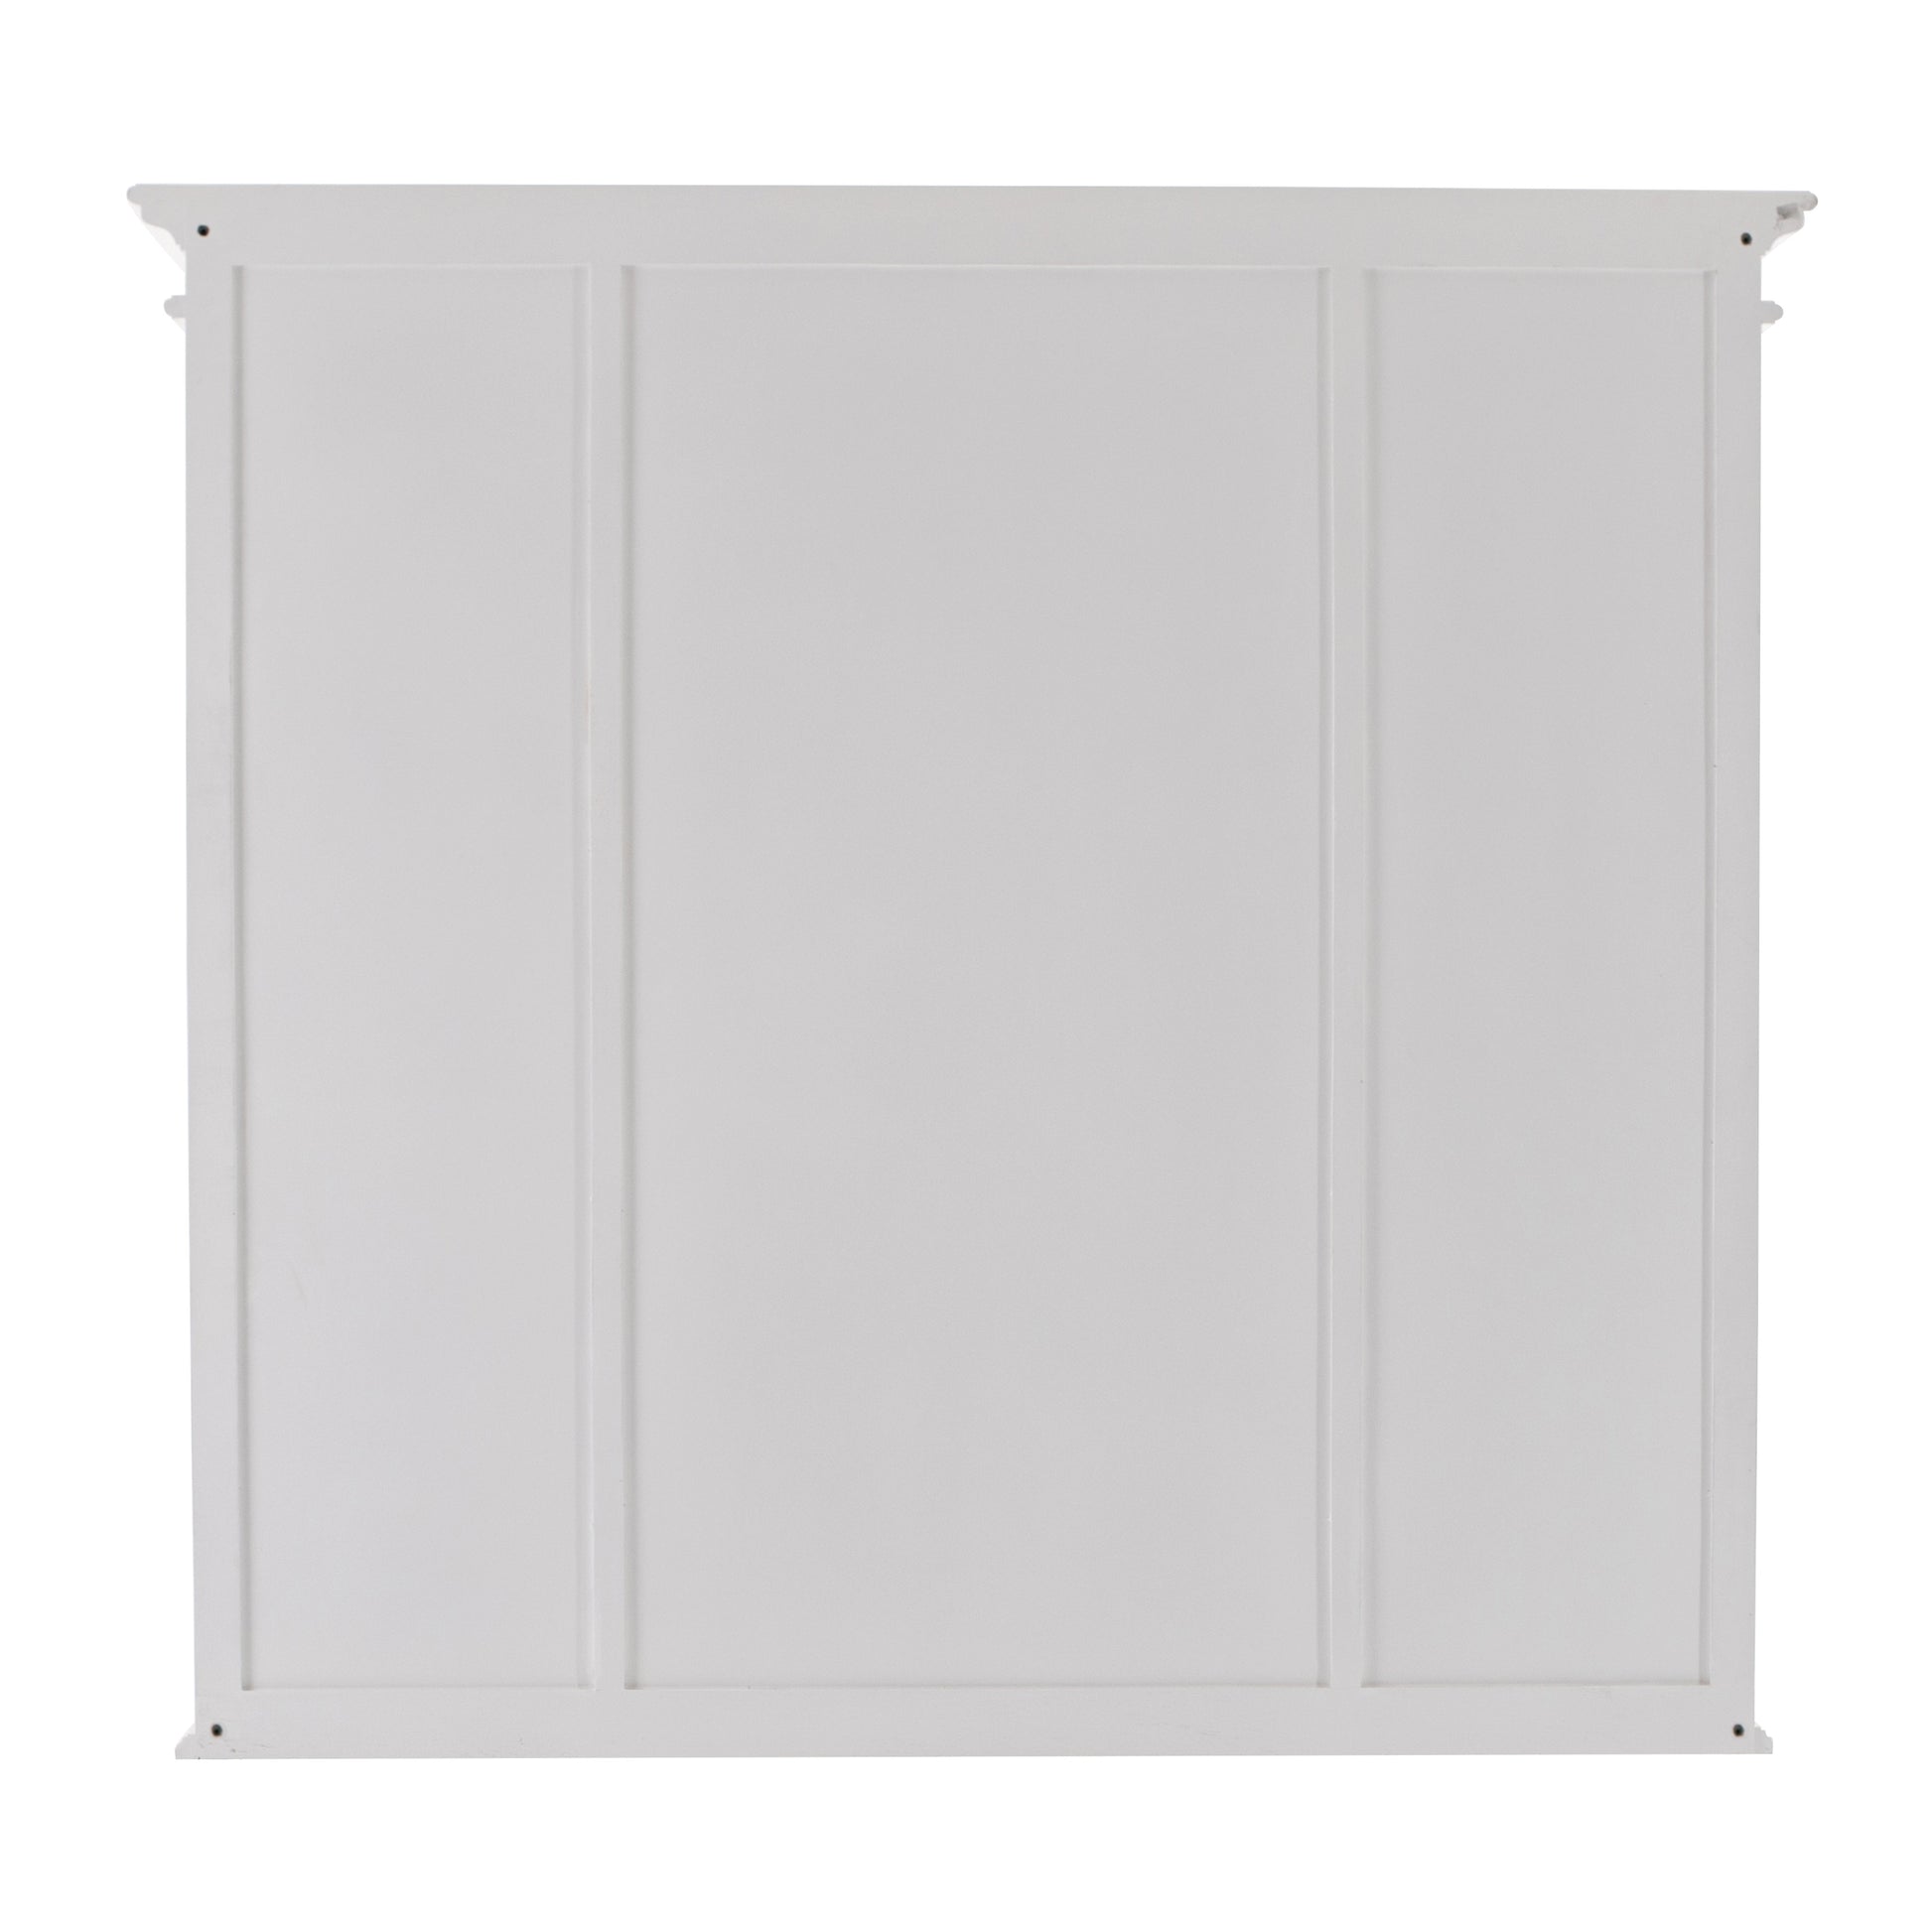 NovaSolo Halifax 57" x 87" White Mahogany Wood Kitchen Hutch Cabinet With Drawers And Glass Doors